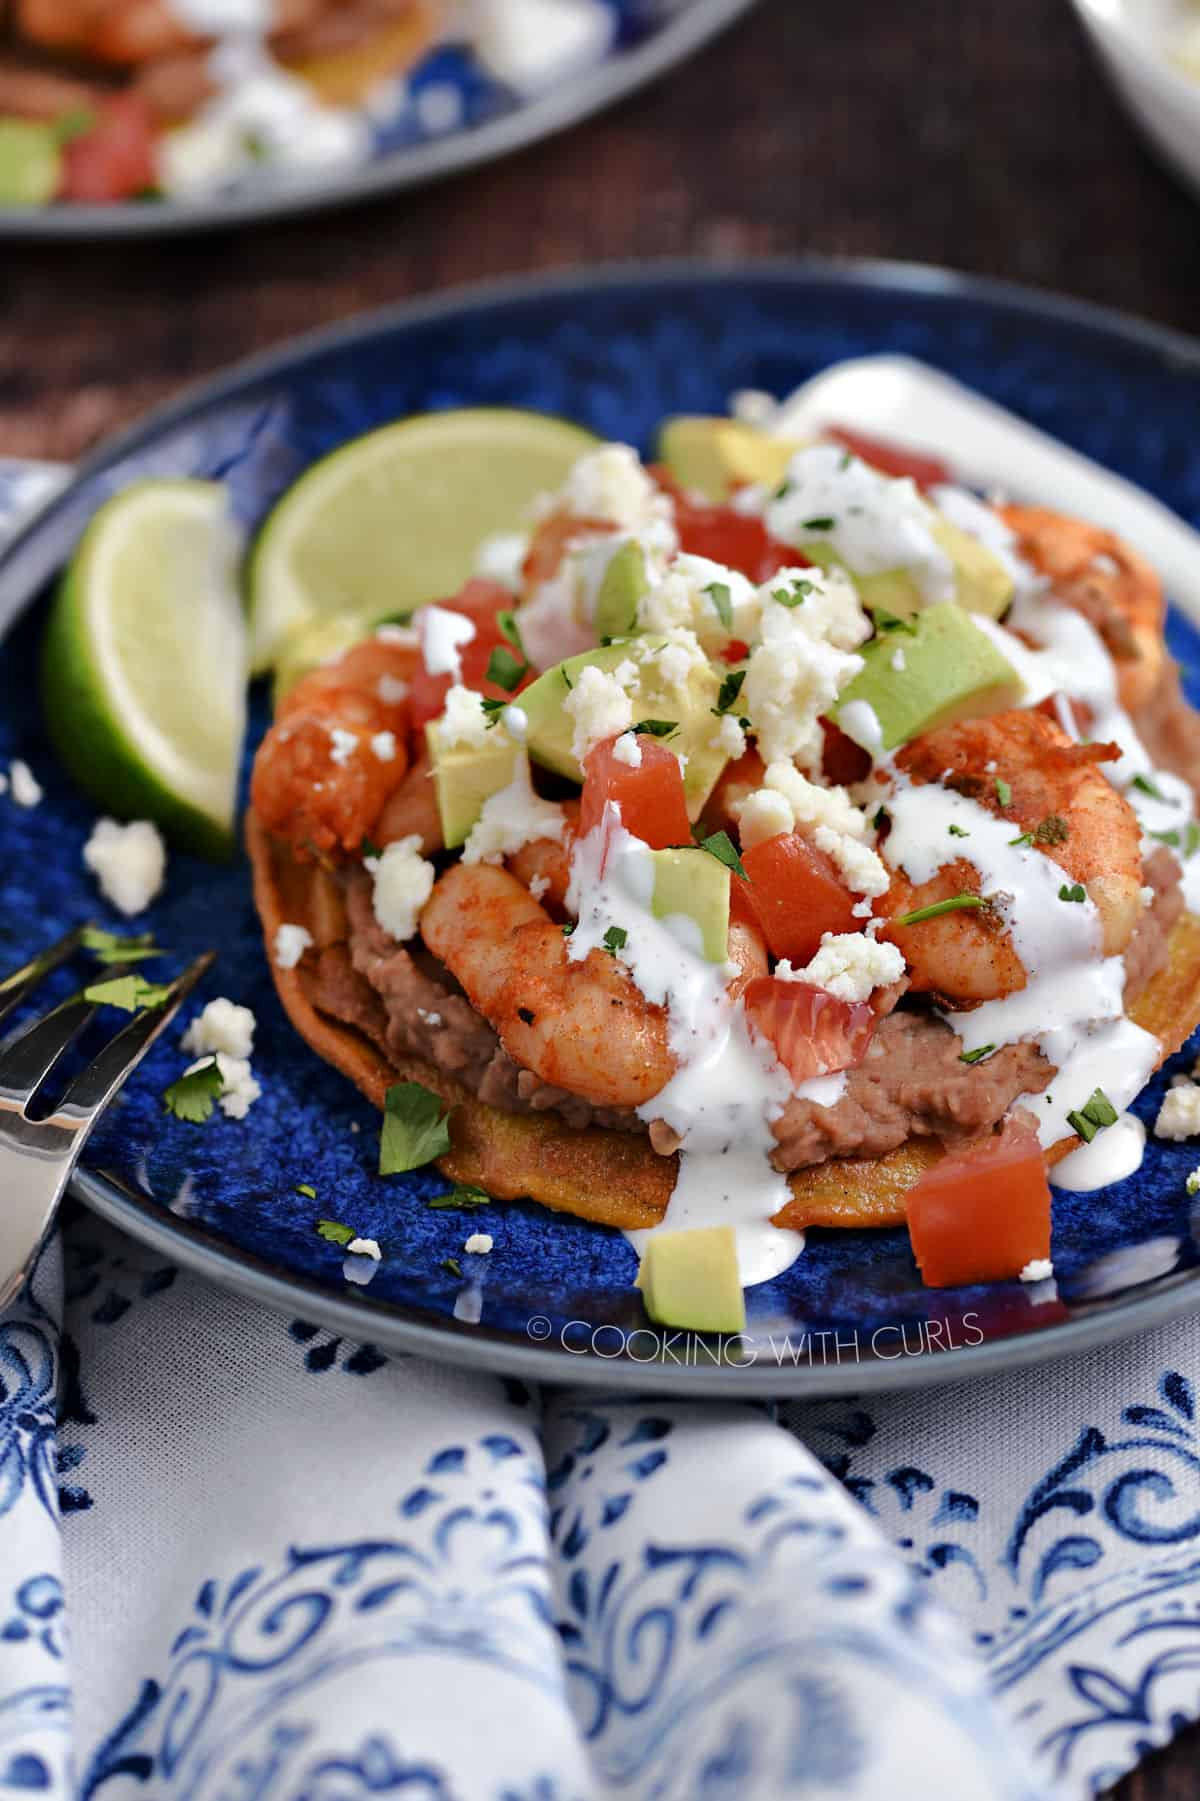 Diced tomatoes and avocado on top of seasoned shrimp and refried beans on a fried corn tortilla garnished with crumbled cheese and drizzled with crema.